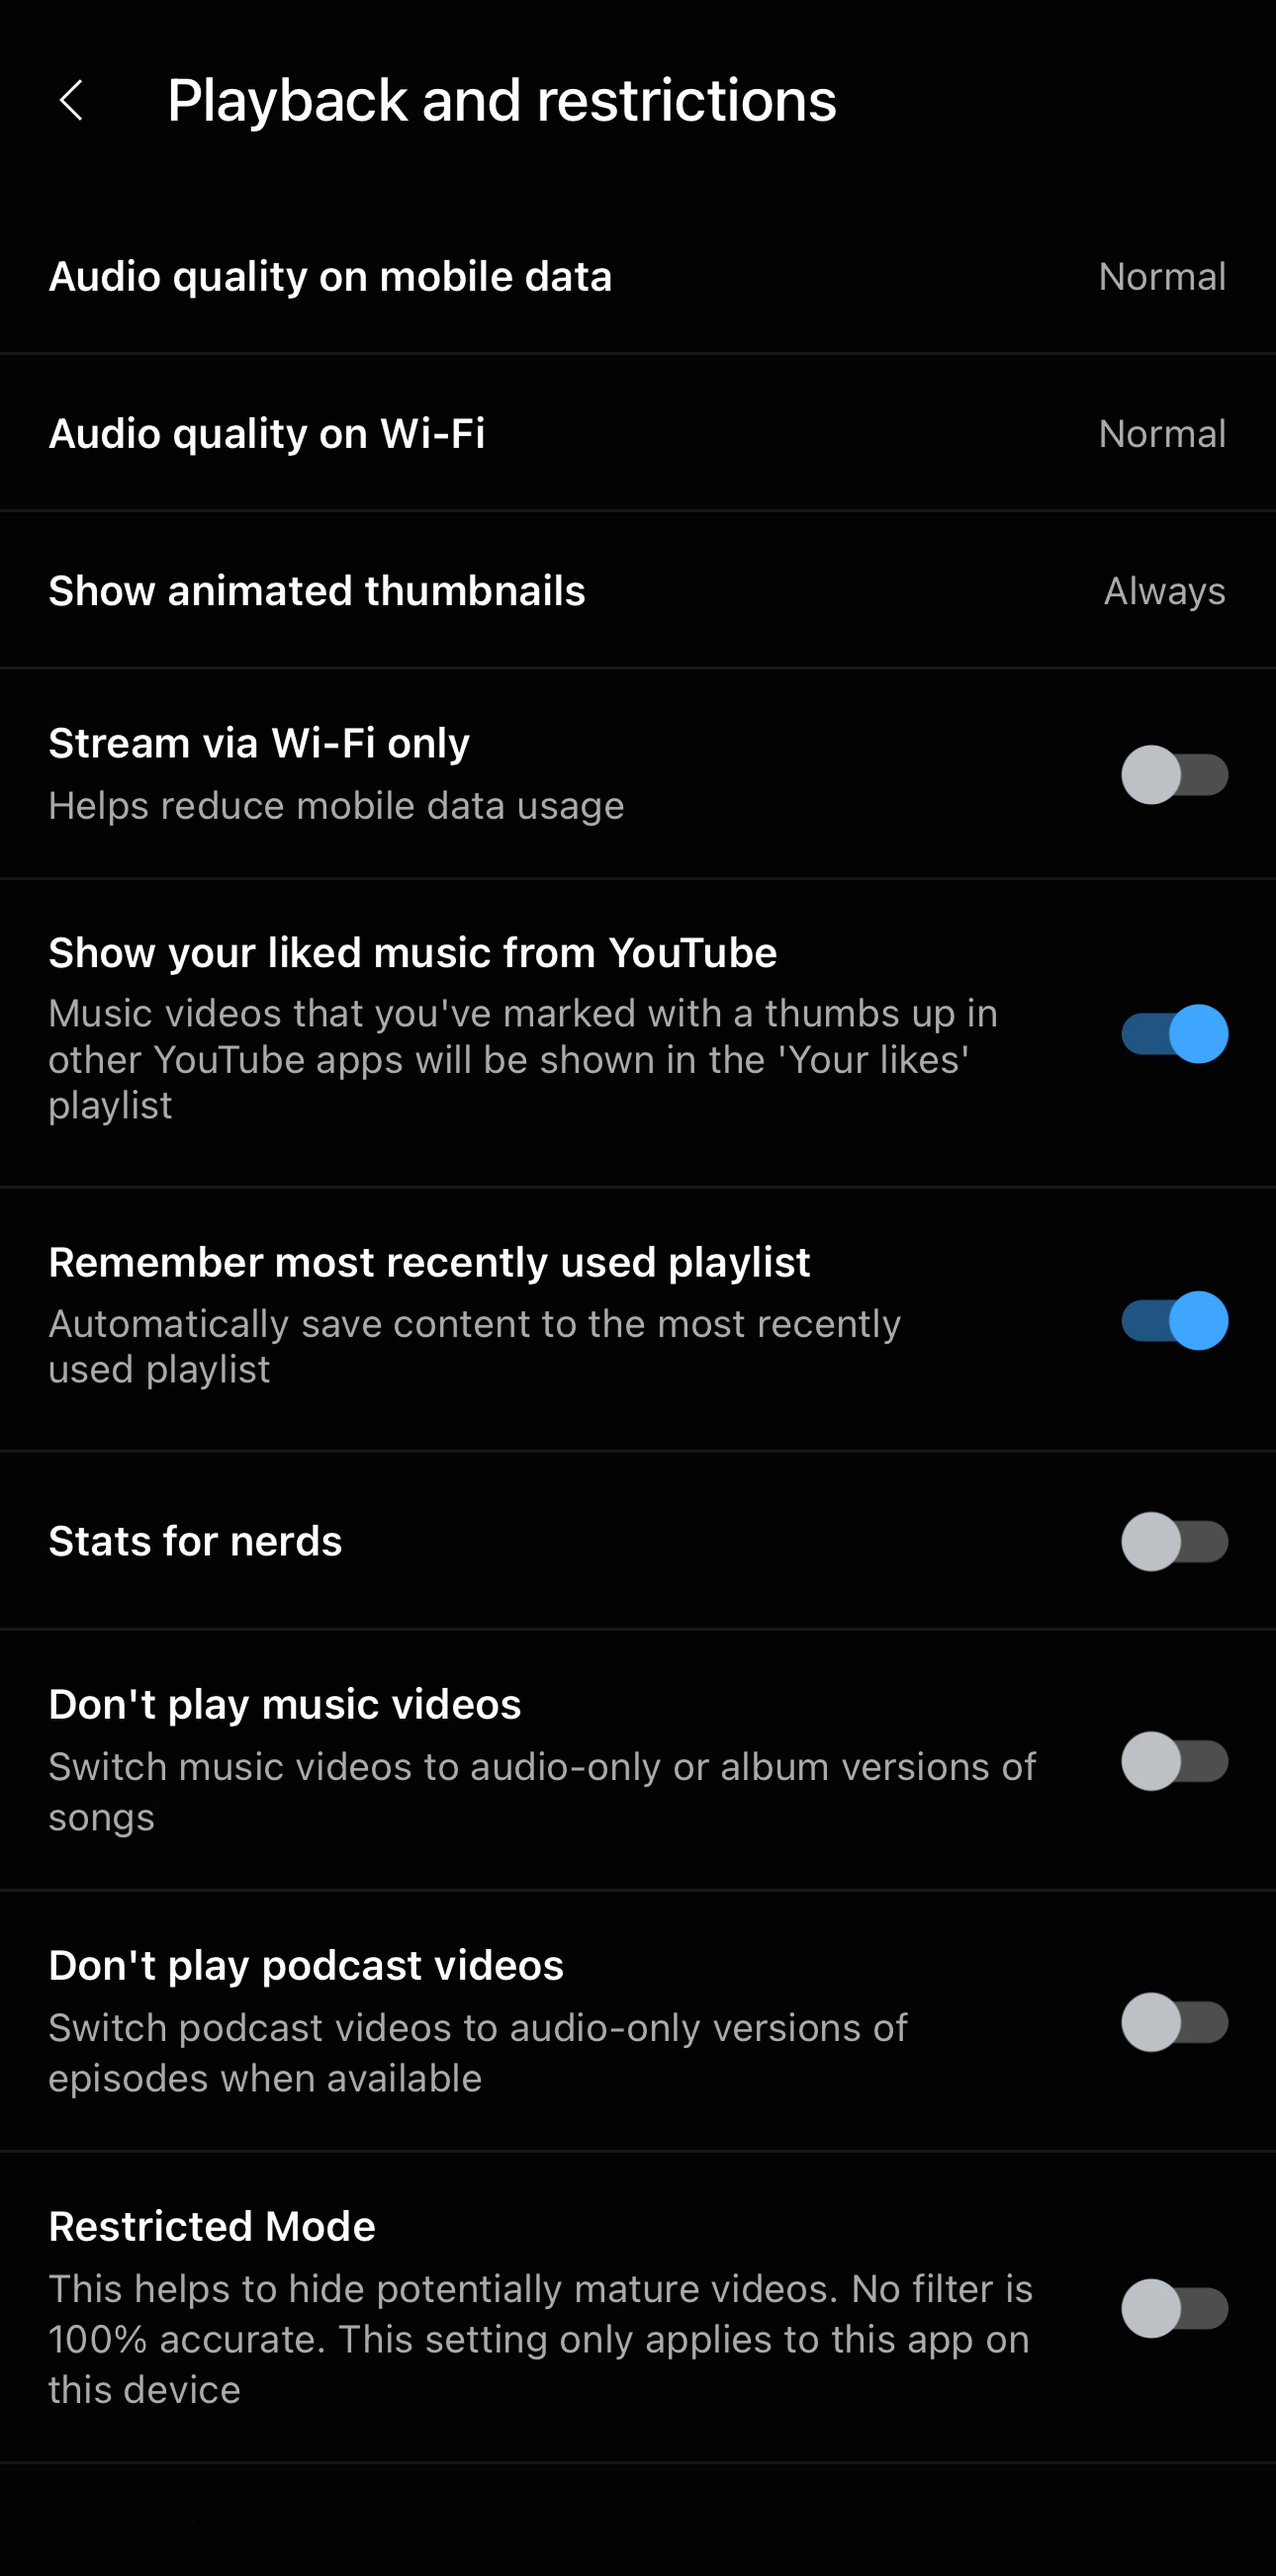 Playback and restrictions page